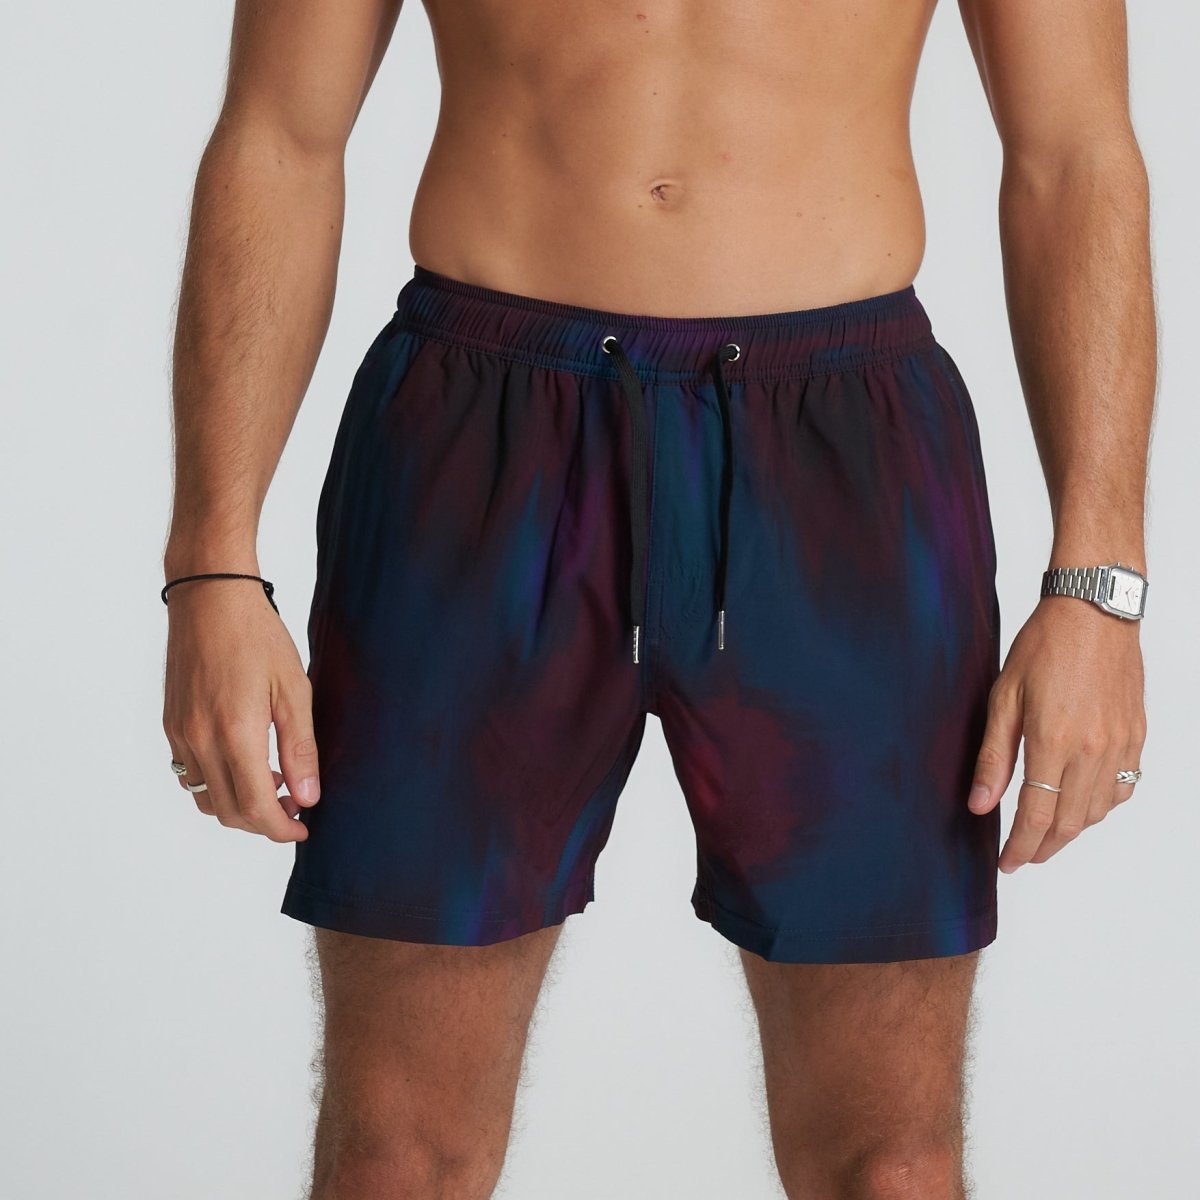 Bounce Back 5” - Blue and Purple Tie Dye Shorts - Bamboo Ave. - Men's Shorts